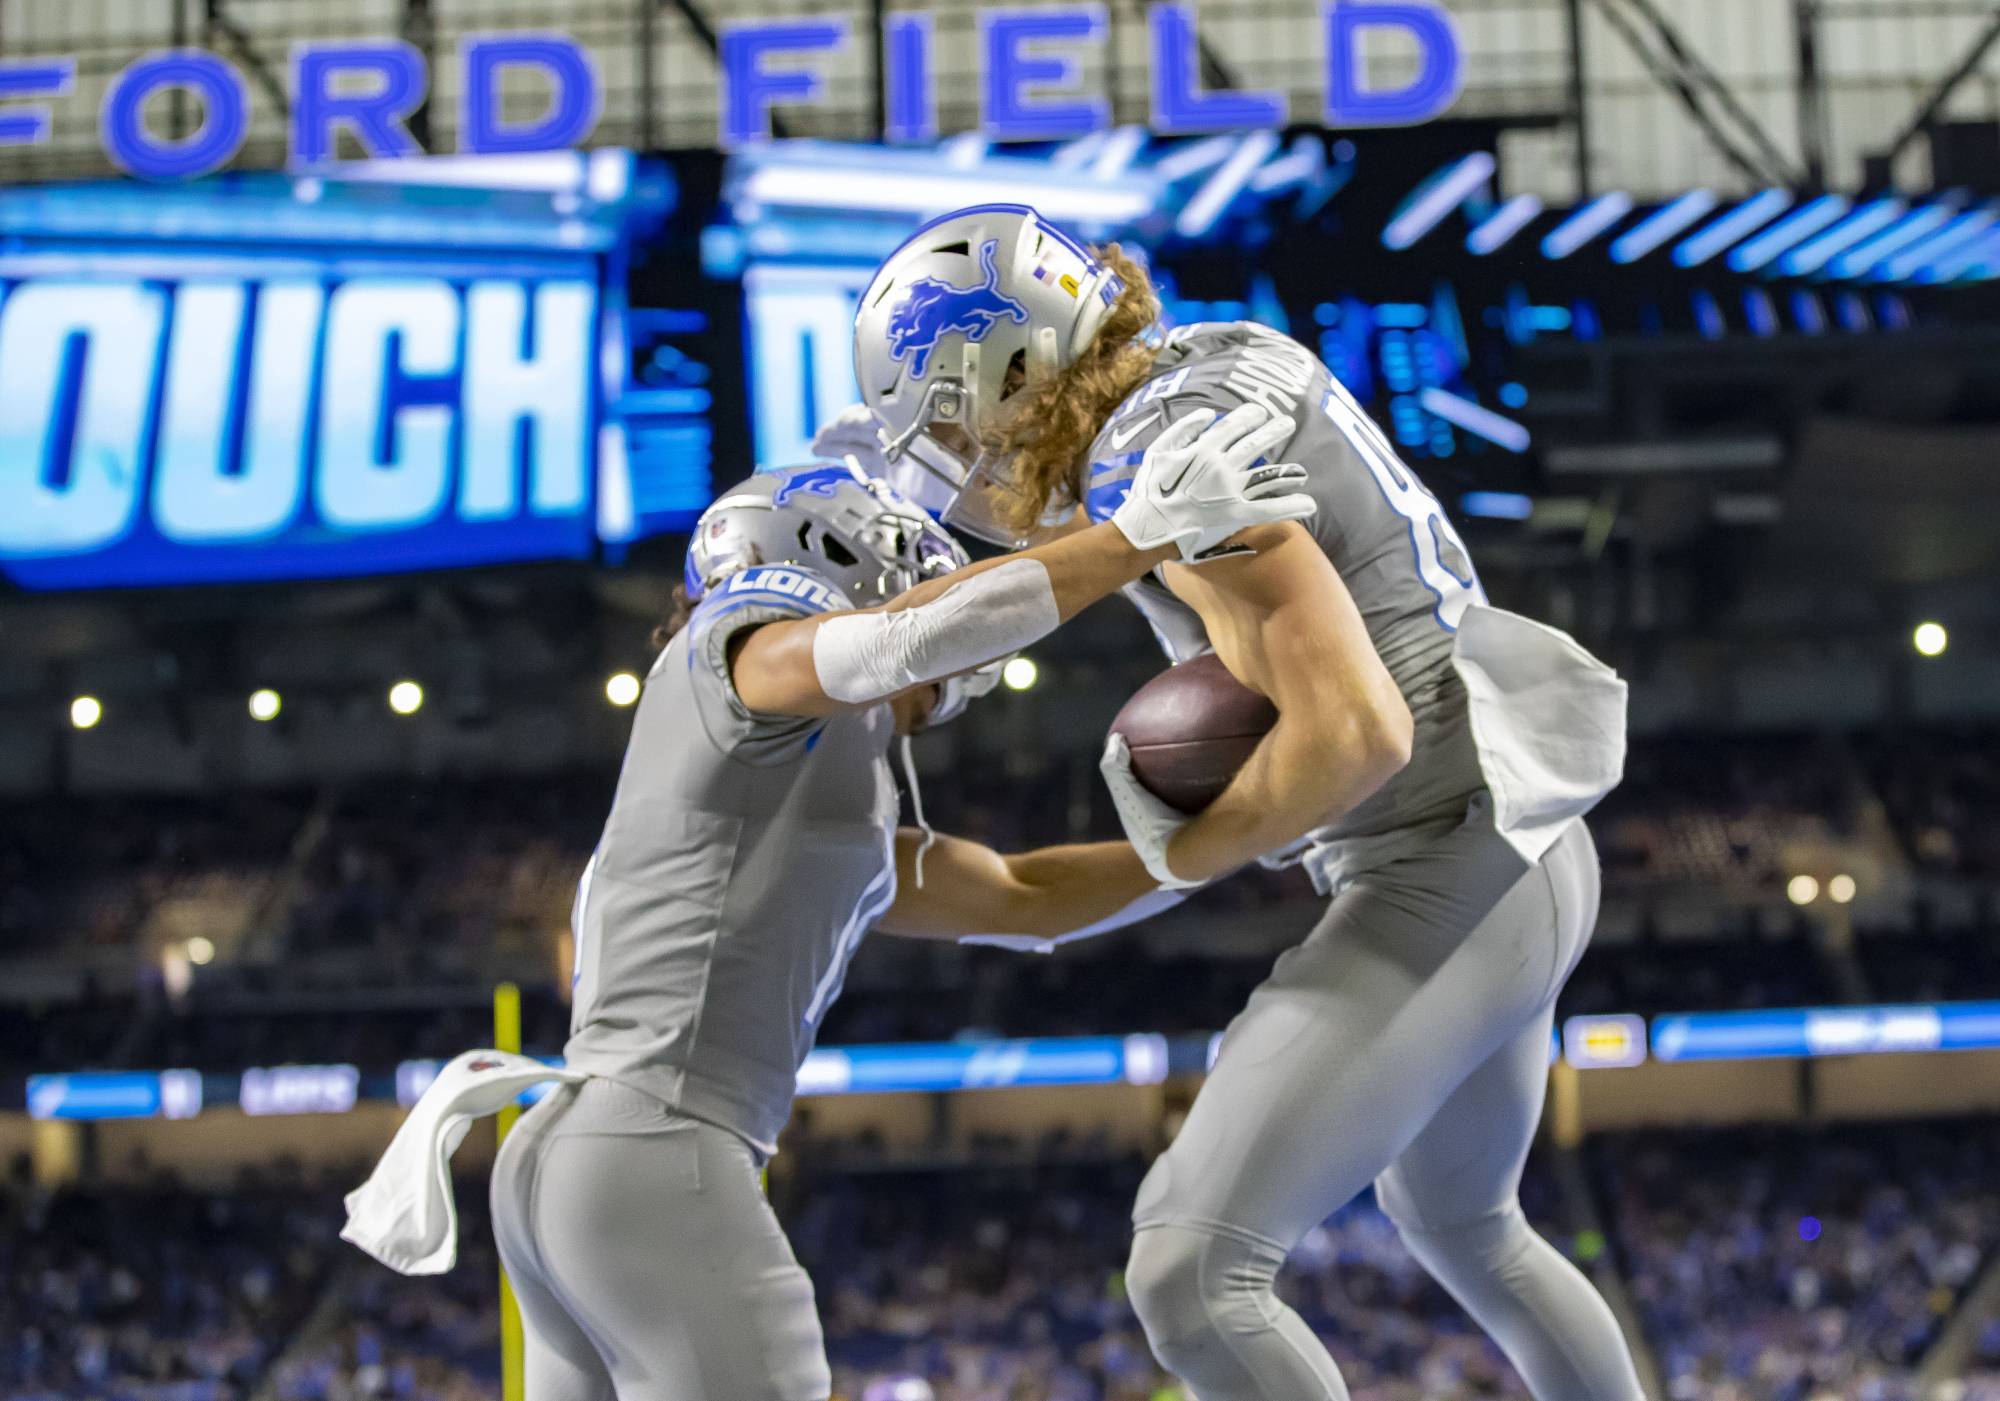 Lions end weeks of agony with last-second triumph over Vikings